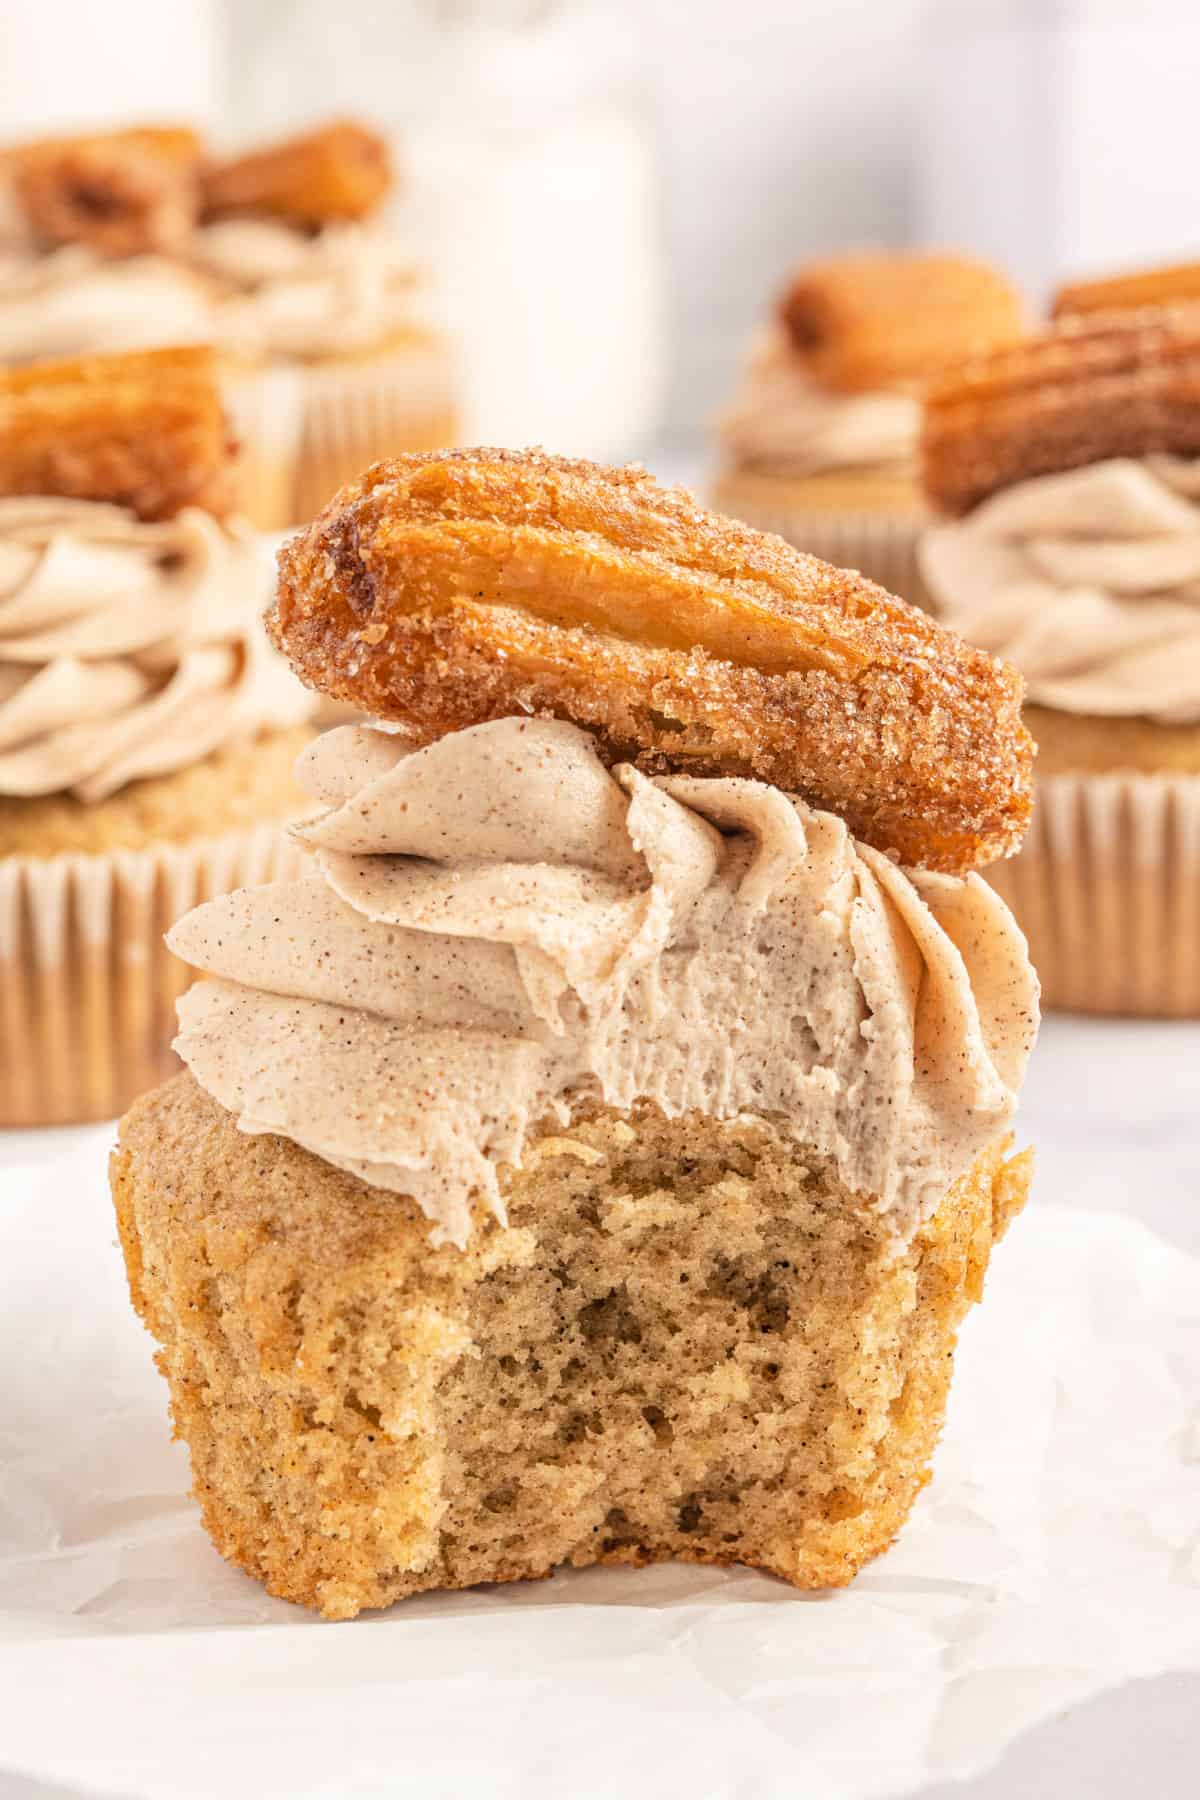 Cinnamon cupcake with churro on top and a bite taken out.